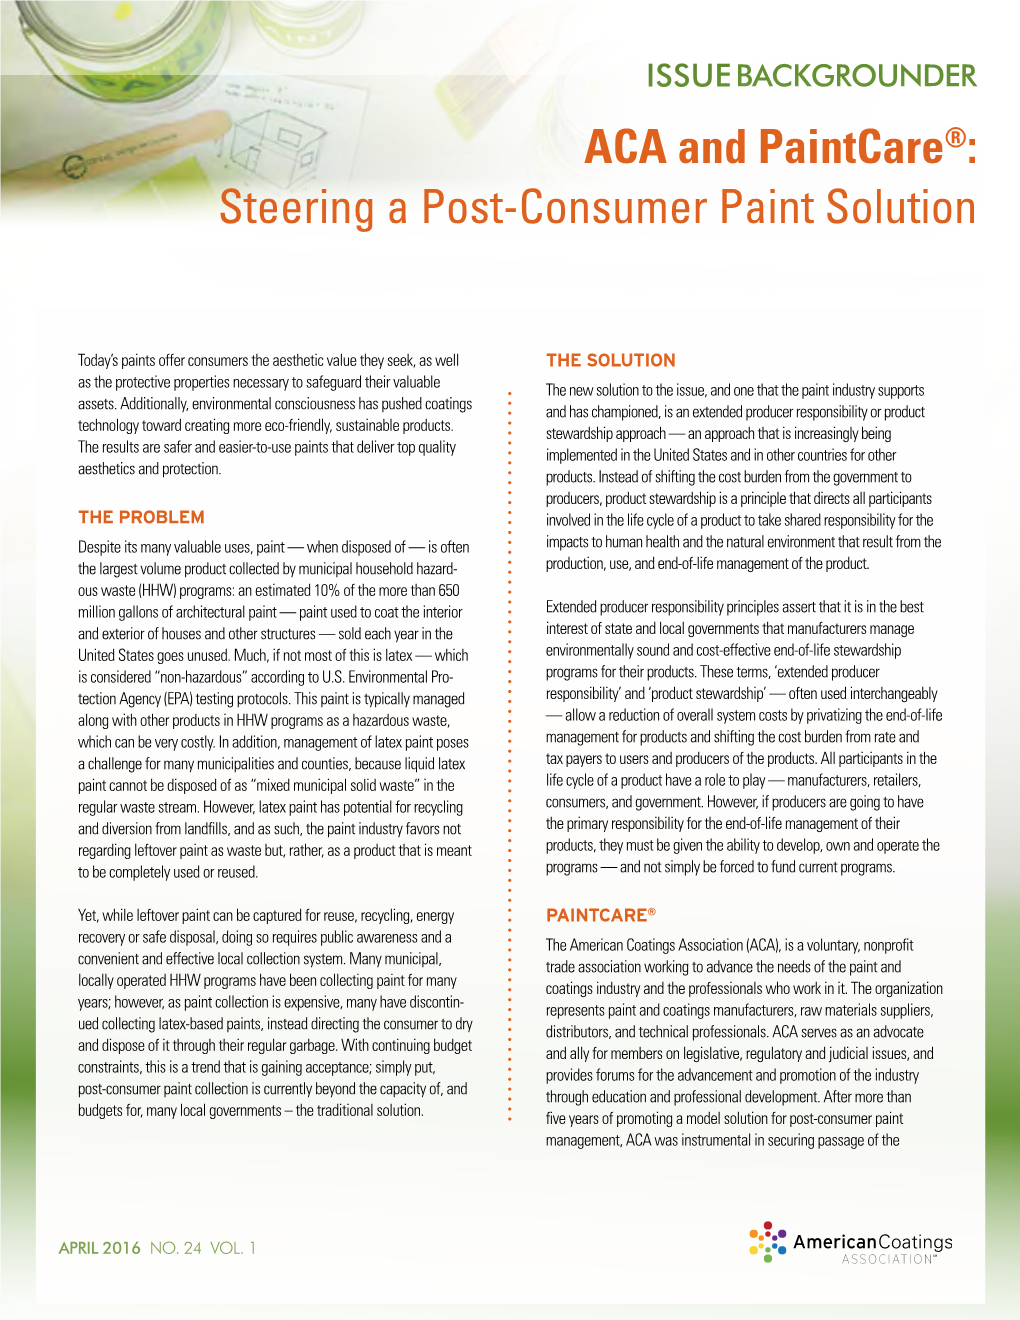 ACA and Paintcare®: Steering a Post-Consumer Paint Solution